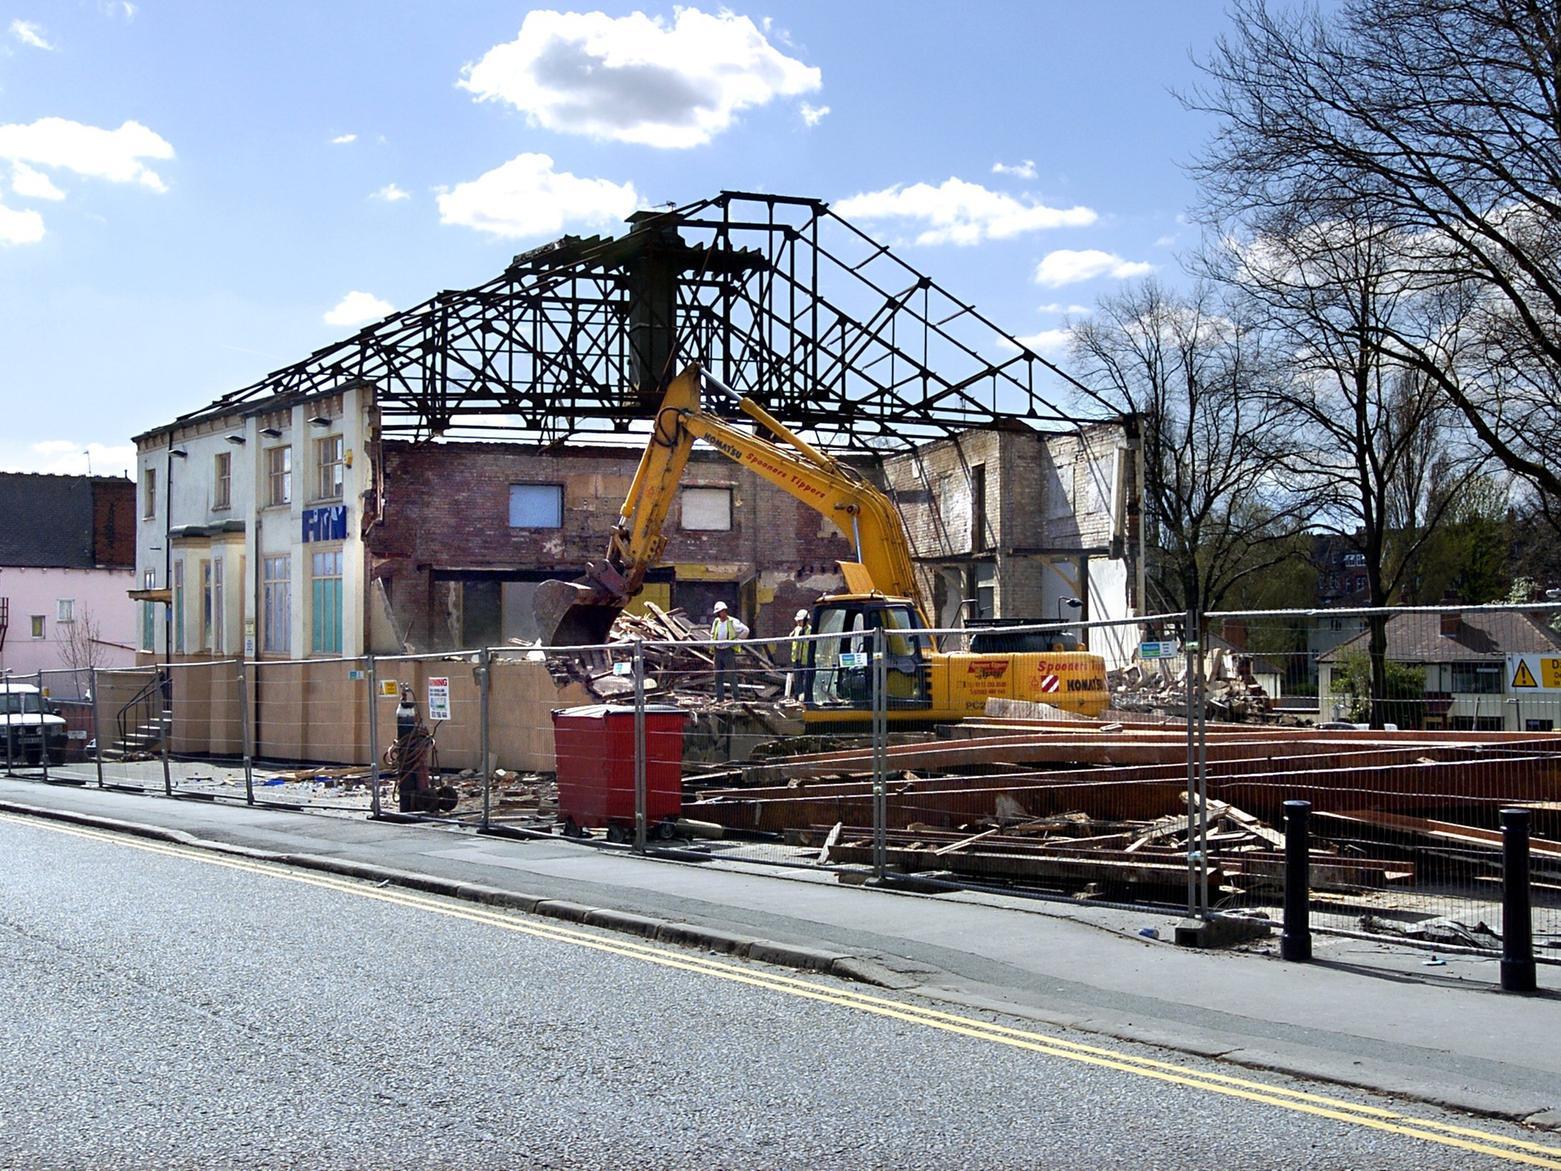 The former dance hall on on Roundhay Road was slowly disappearing in April 2006 as the demolition men move in.